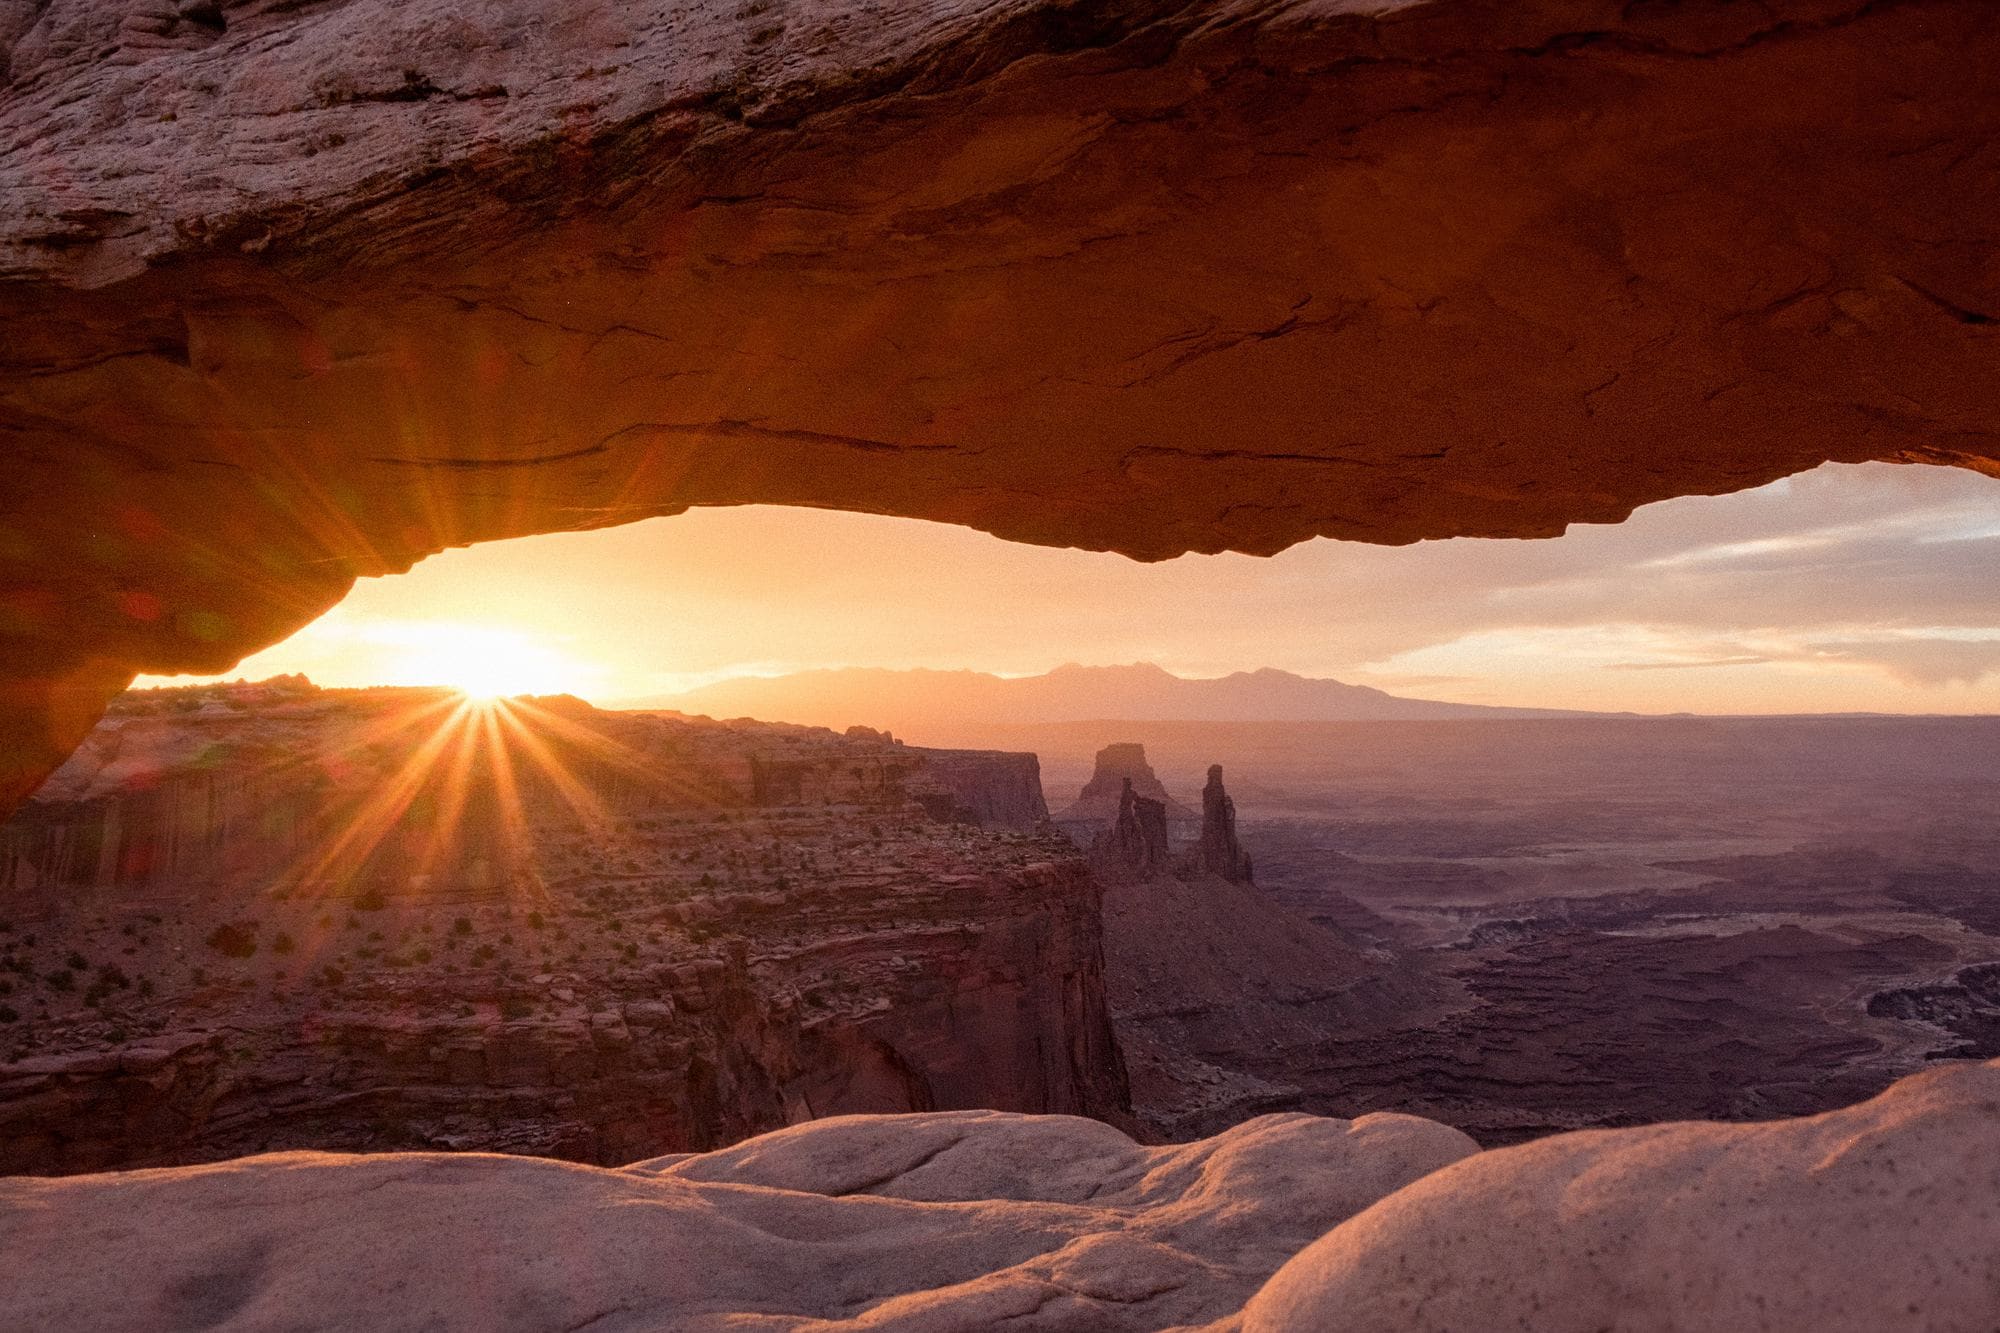 Plan an epic trip to Utah's Mighty 5 with this 9-day Utah National Parks road trip itinerary w/ tips on the best hikes, activities, camping & more.